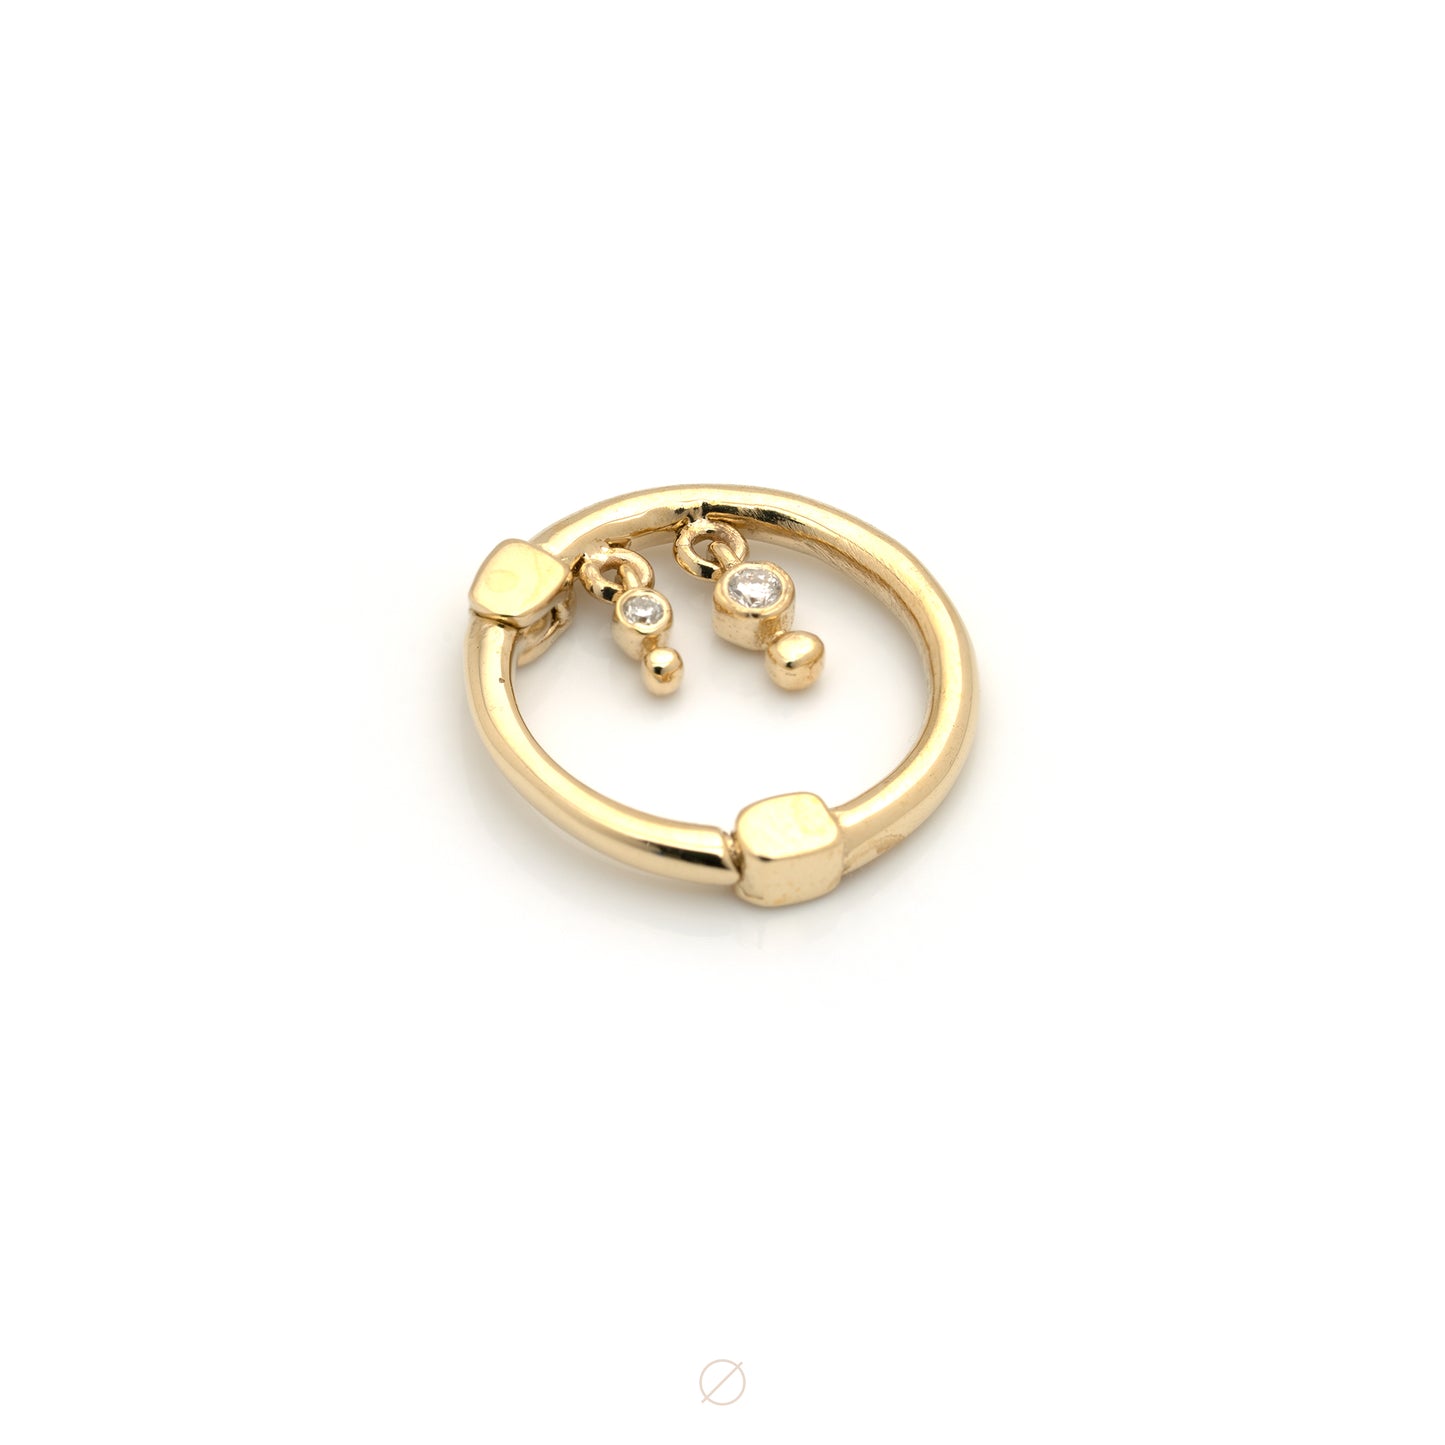 Liminality Dngle with Diamonds Easy Ring by Pupil Hall